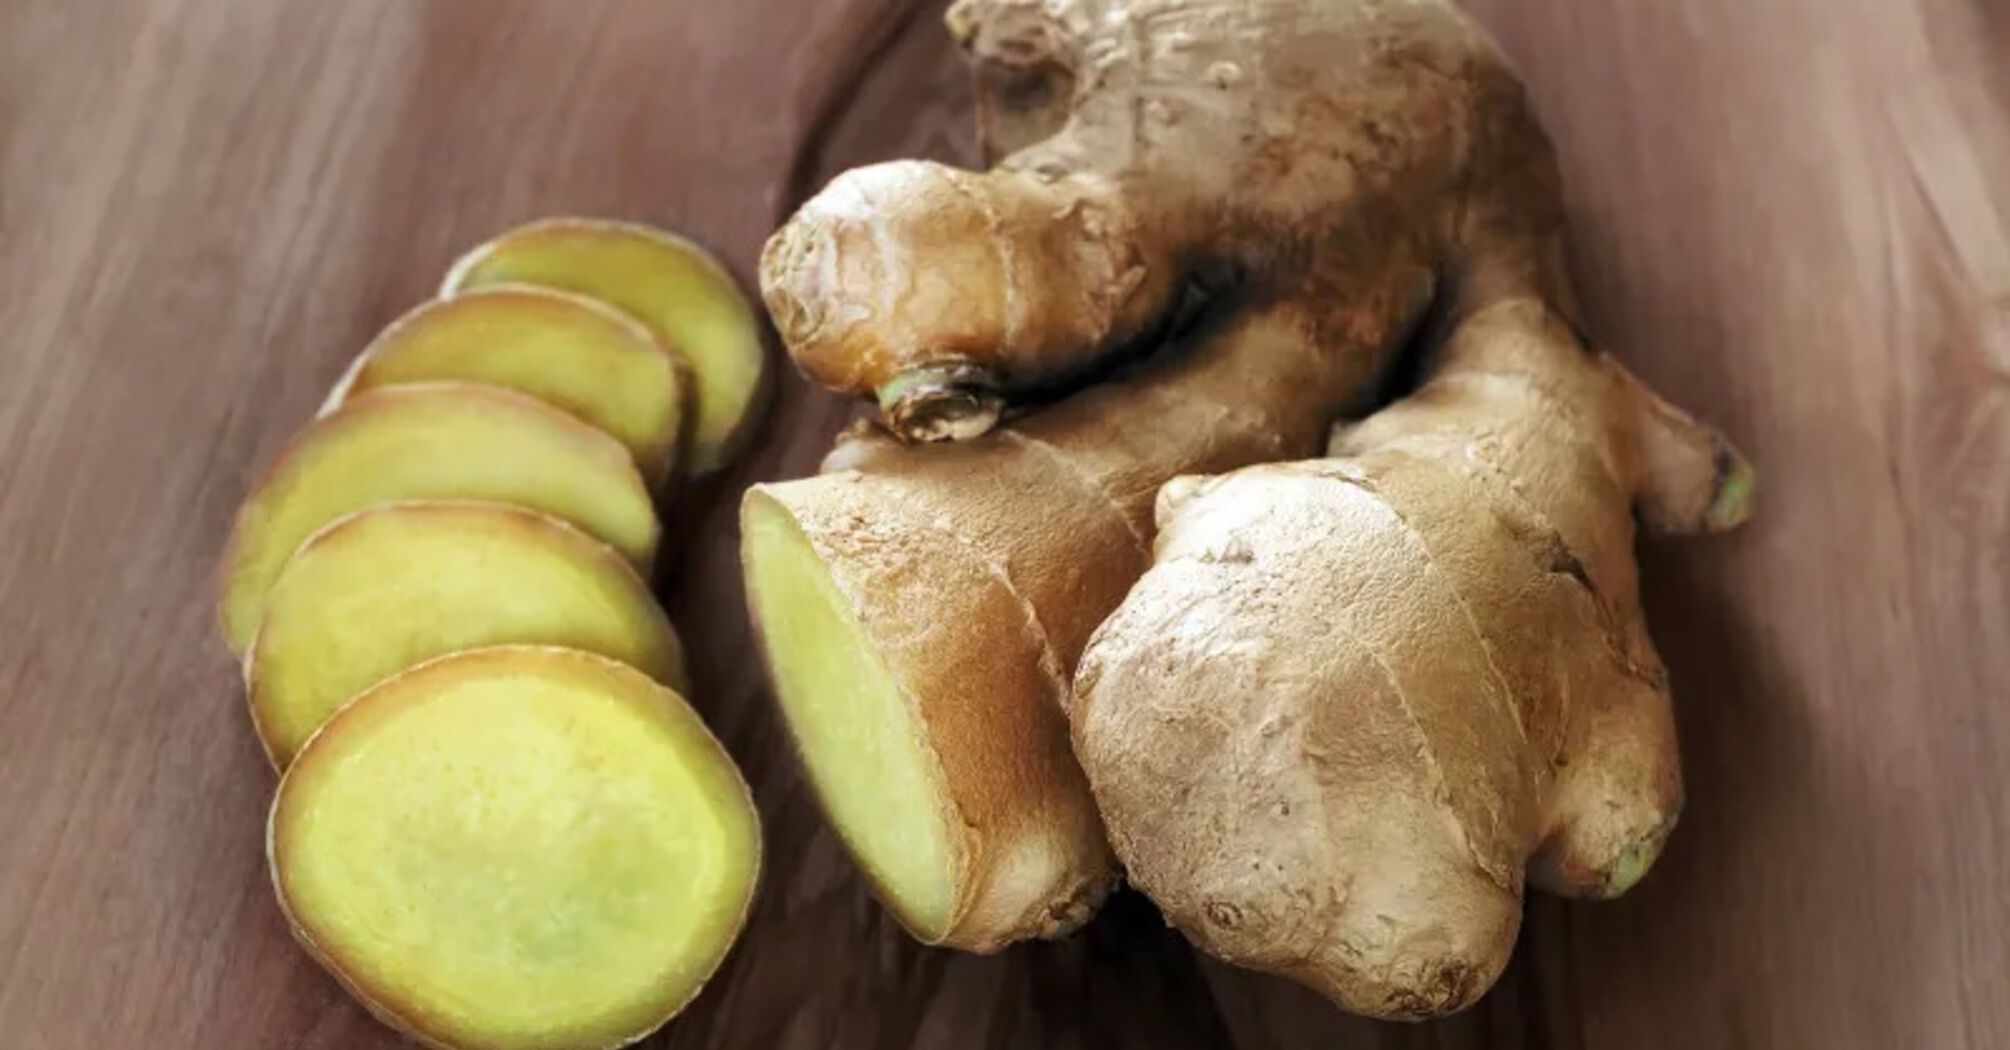 Why carry ginger in your pocket